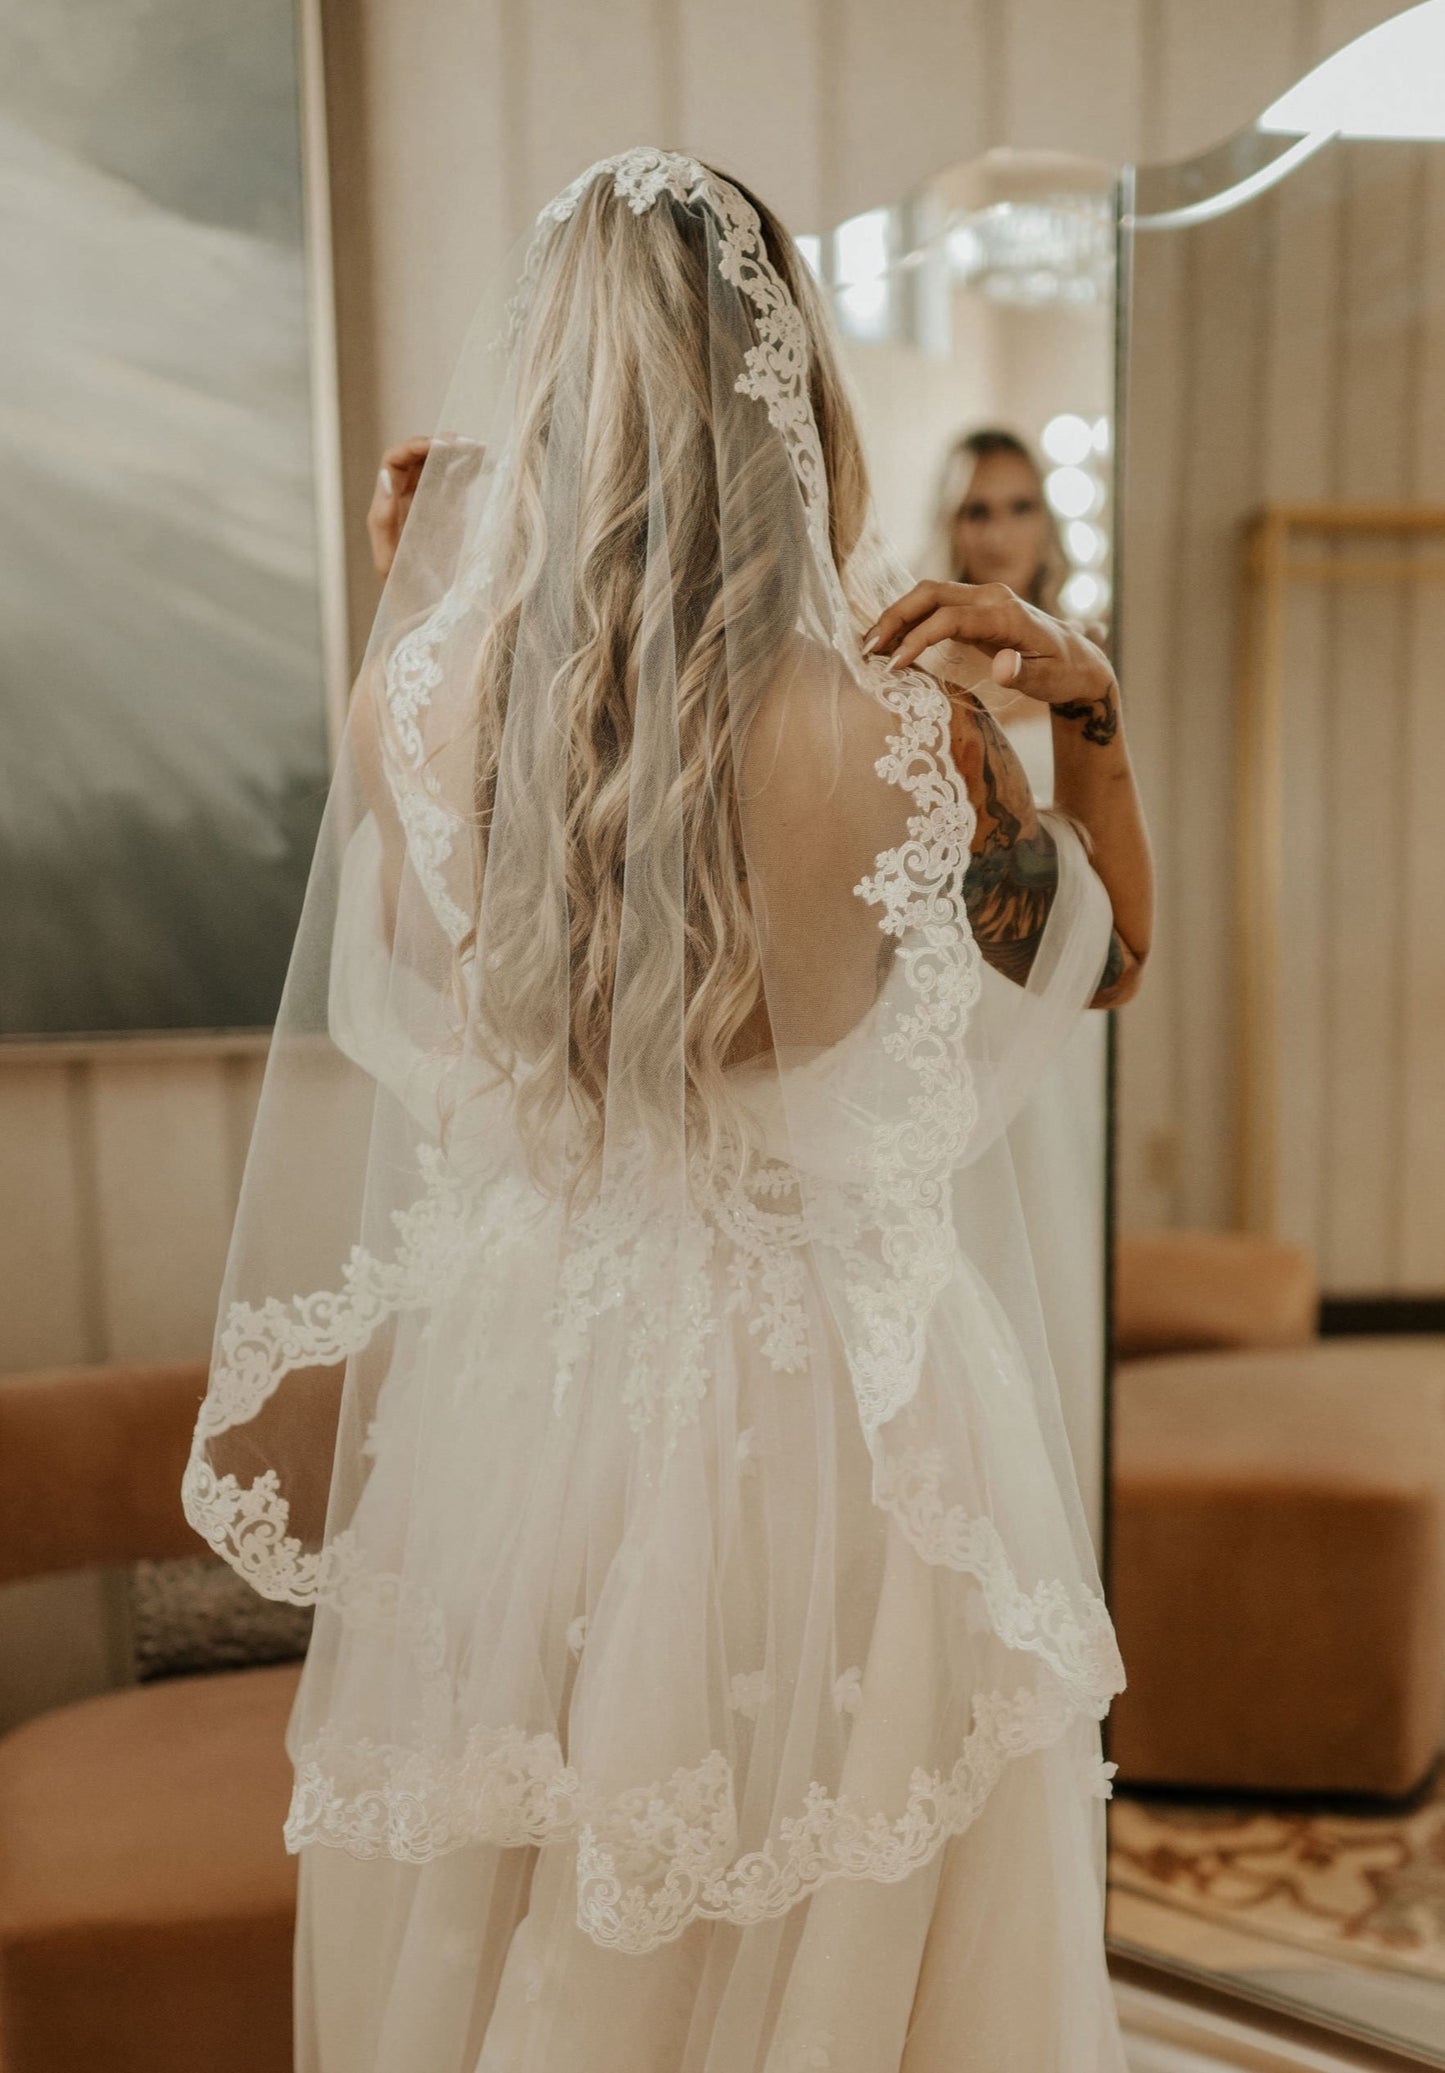 Royal Soft Tulle Wedding Veil with Lace Trimming